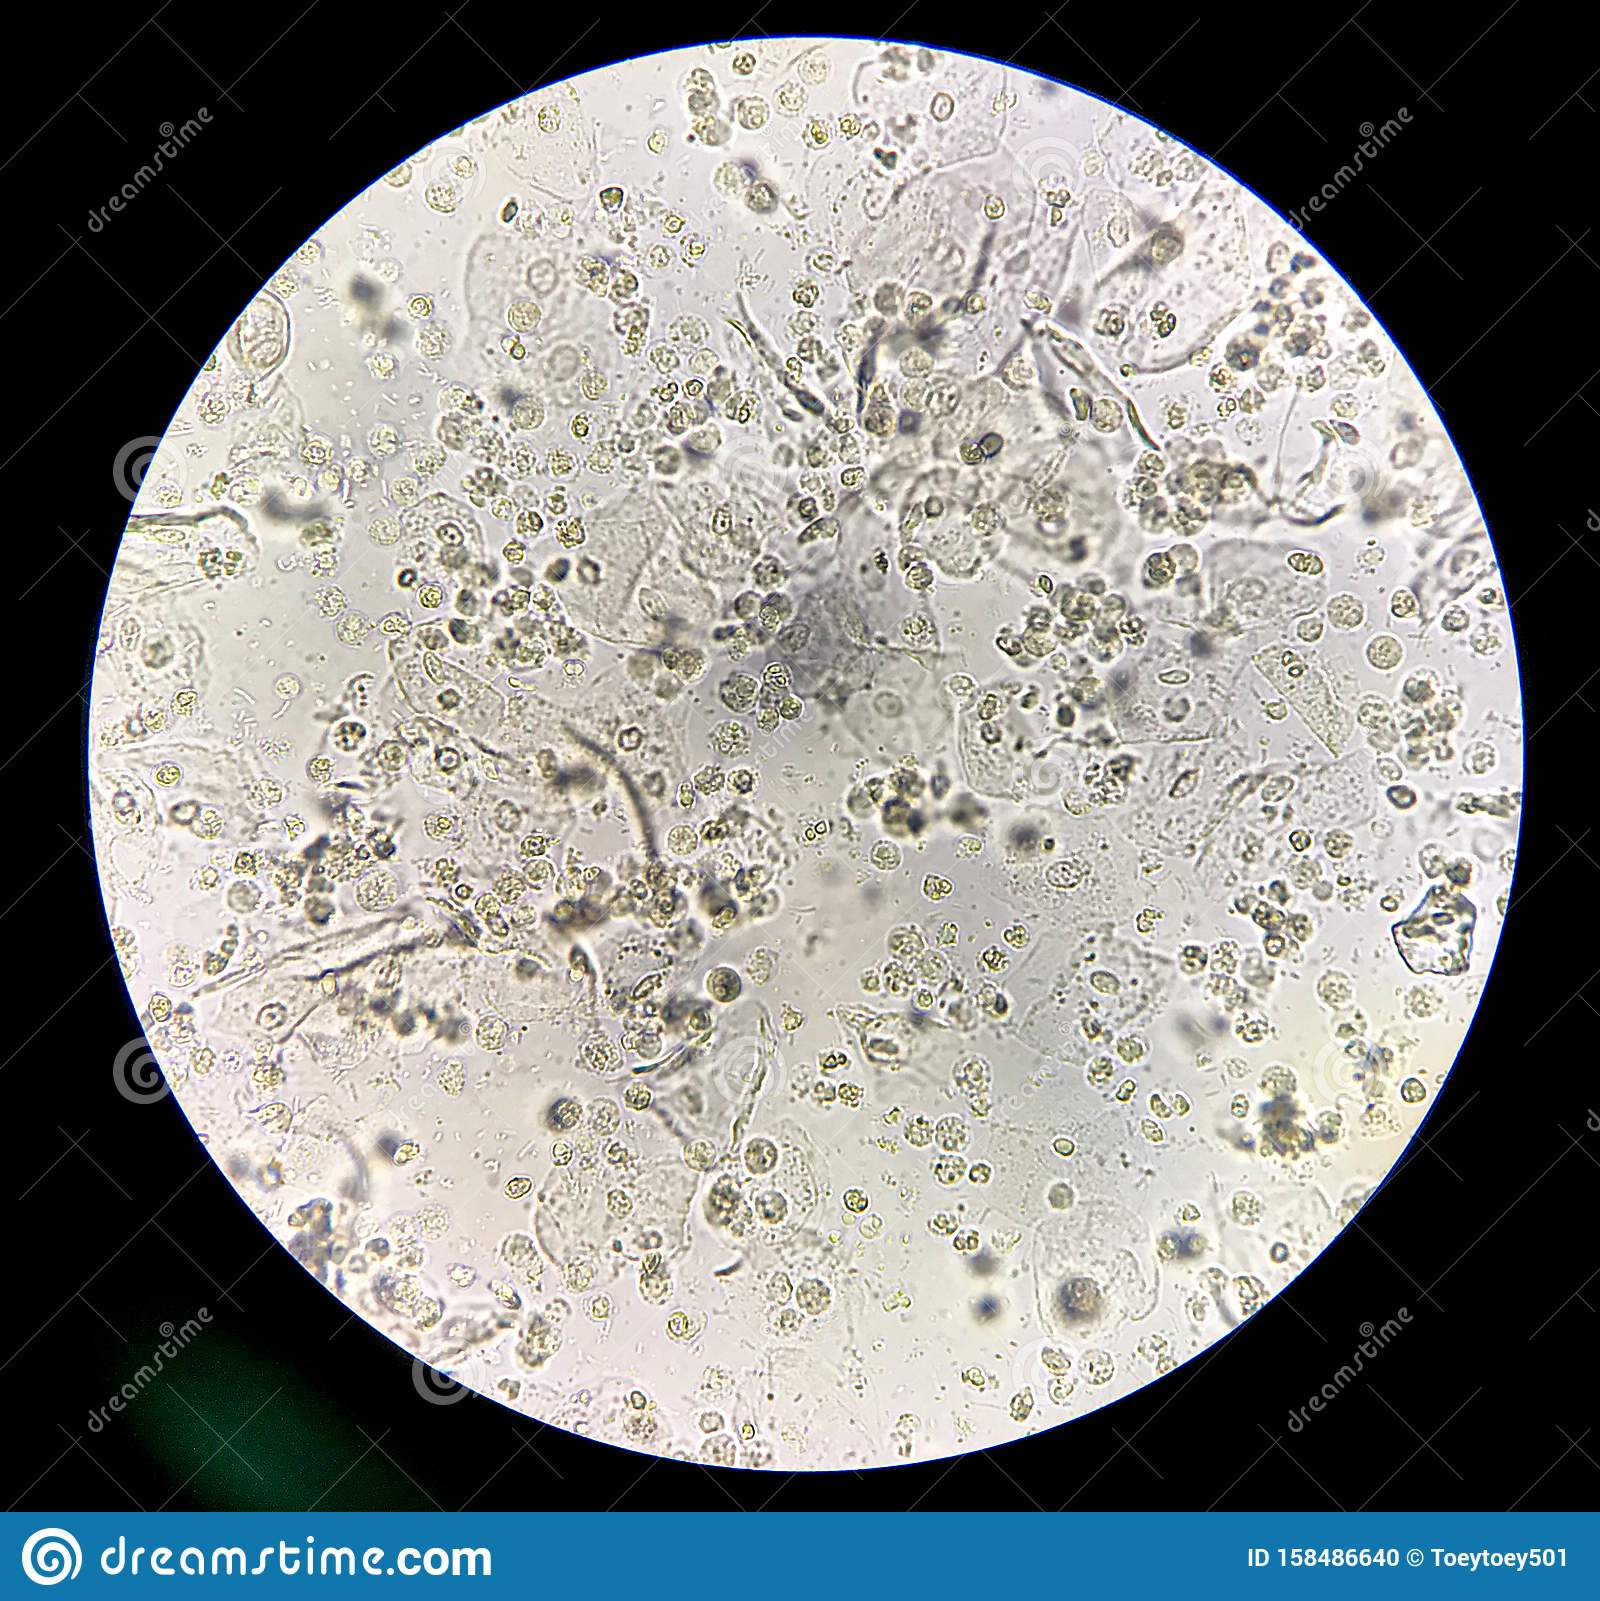 Moderate Bacteria And White Blood Cells In Patien Bacteria Urinary ...